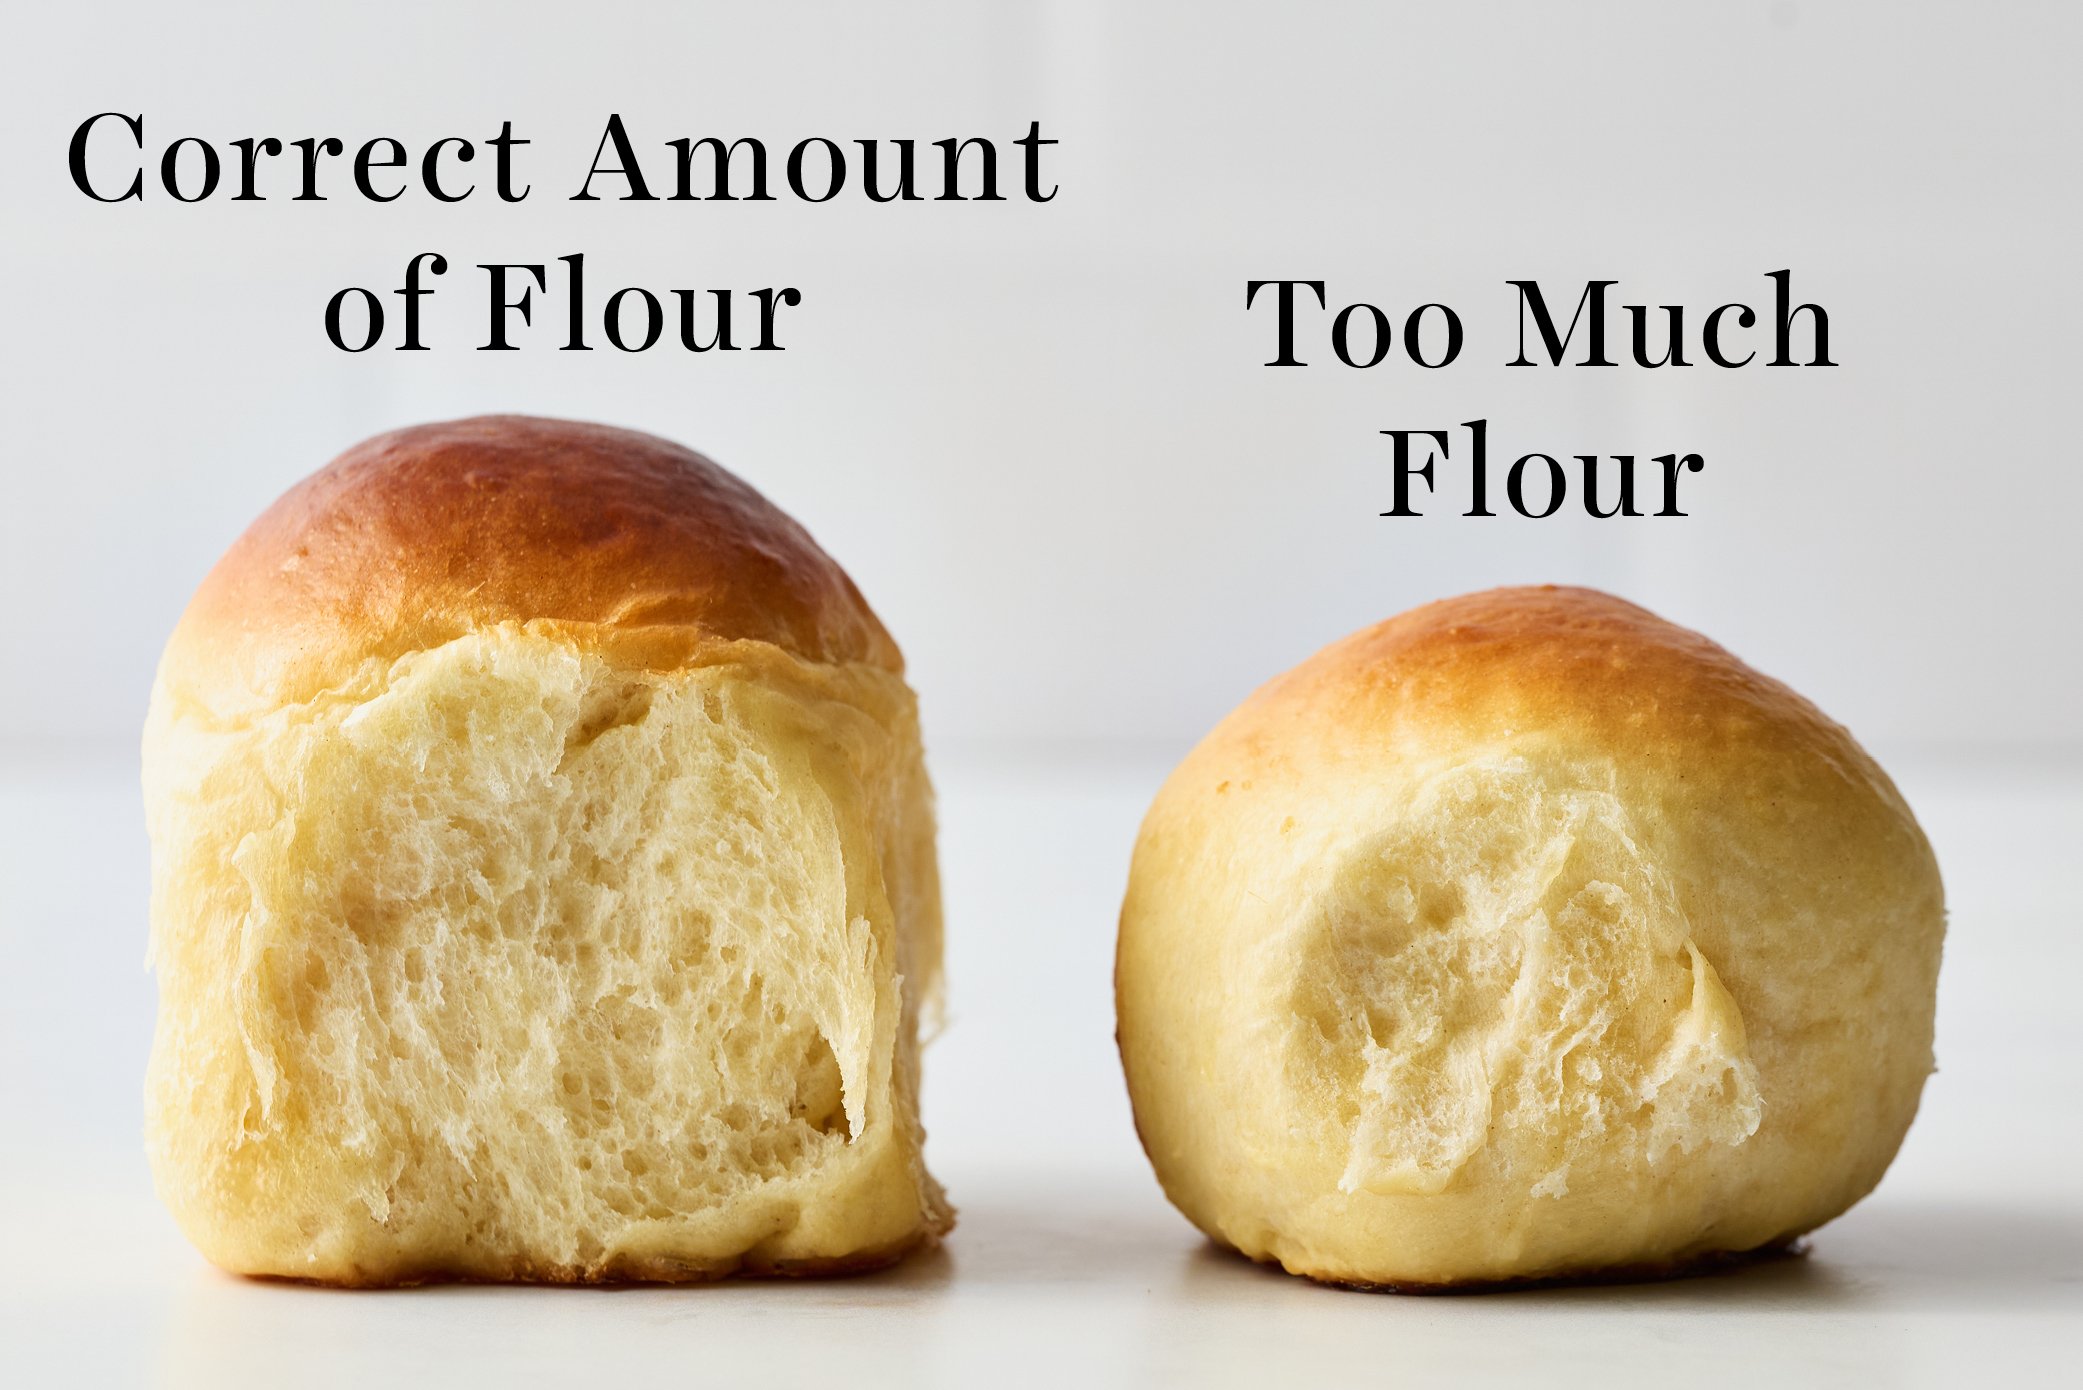 comparison of bread rolls with the correct amount of flour vs. too much flour